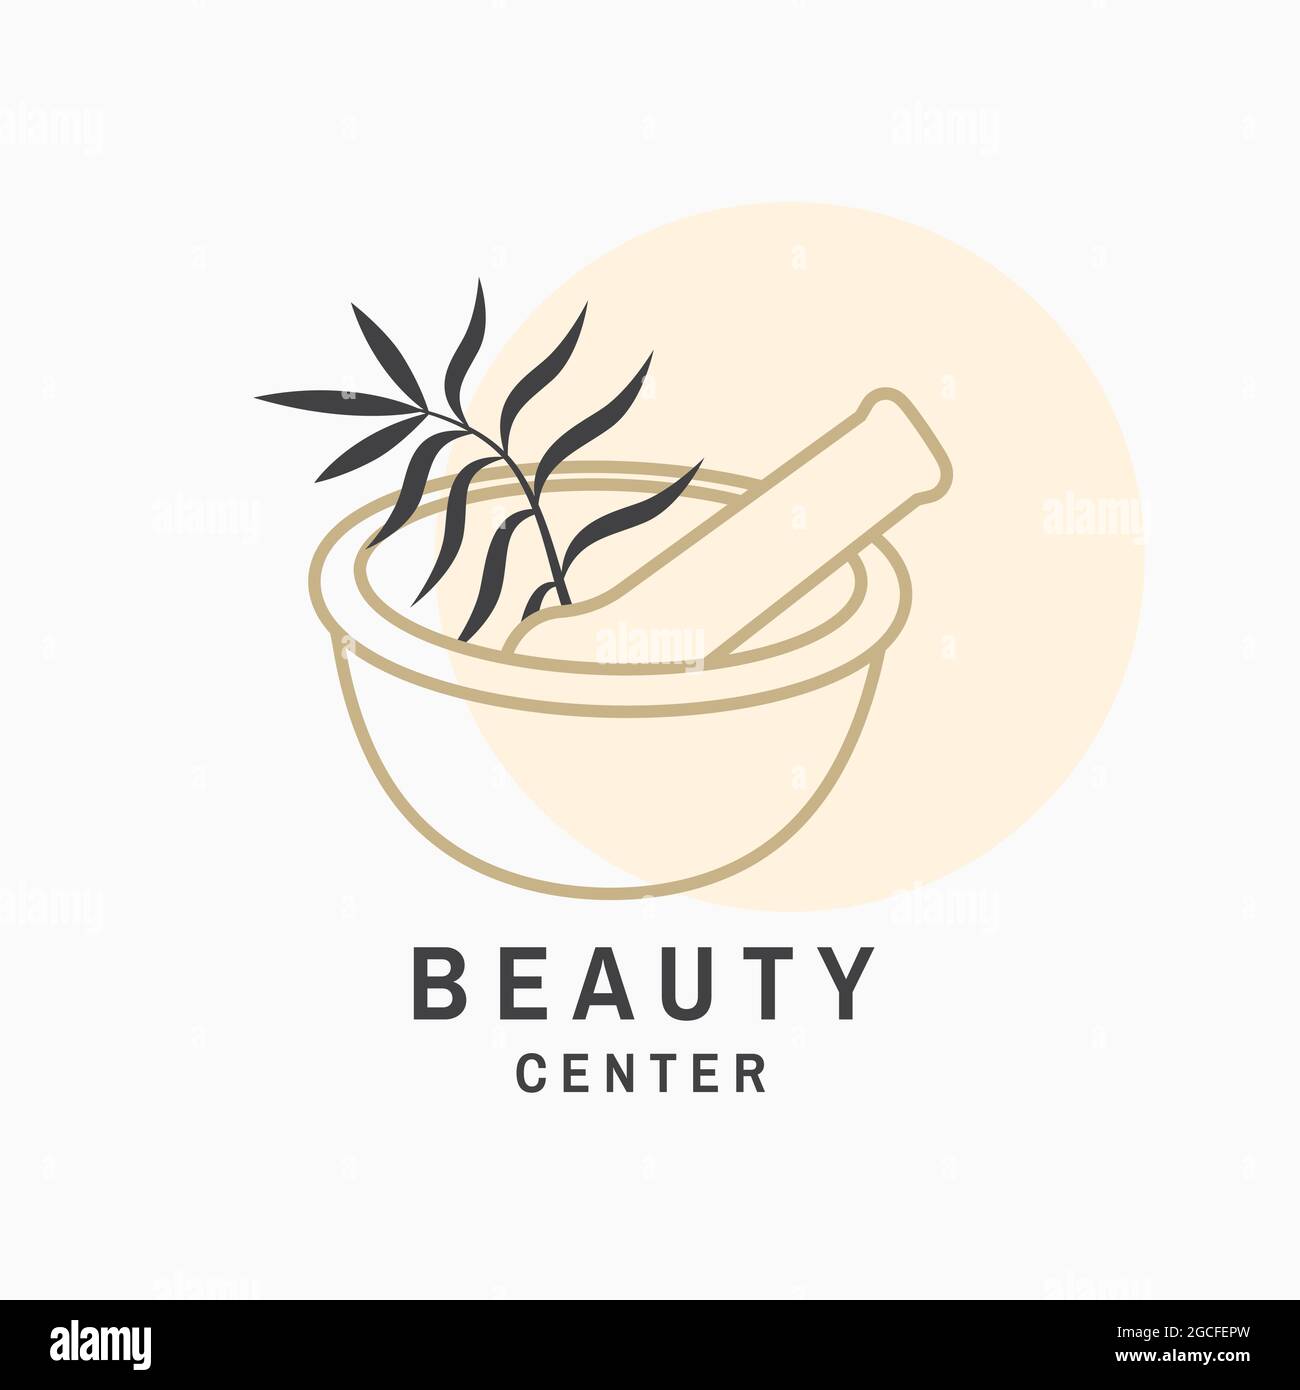 Beauty center with flowers, mortar and pestle for logo, label